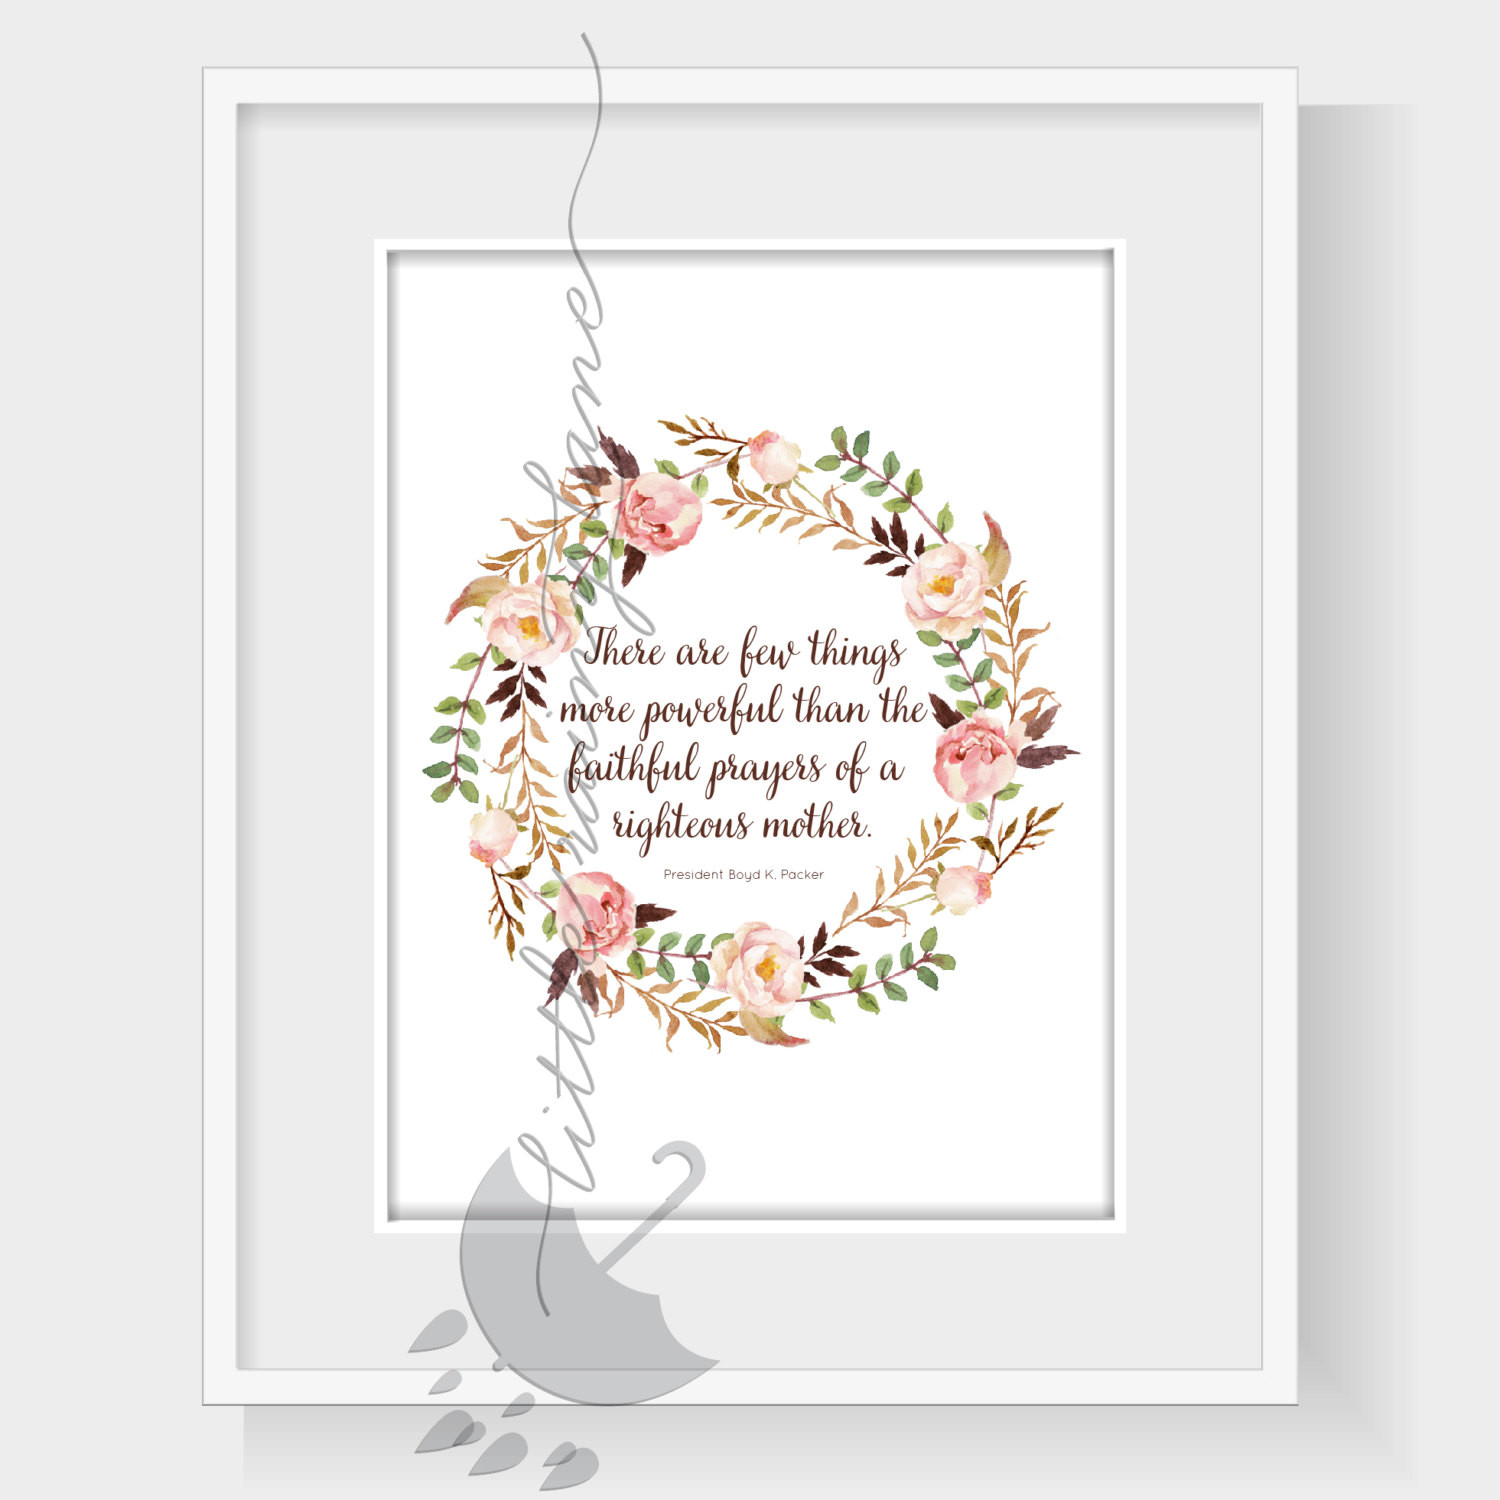 Lds Quotes About Mothers
 Mother s Day Gift Prayers of a mother LDS quote